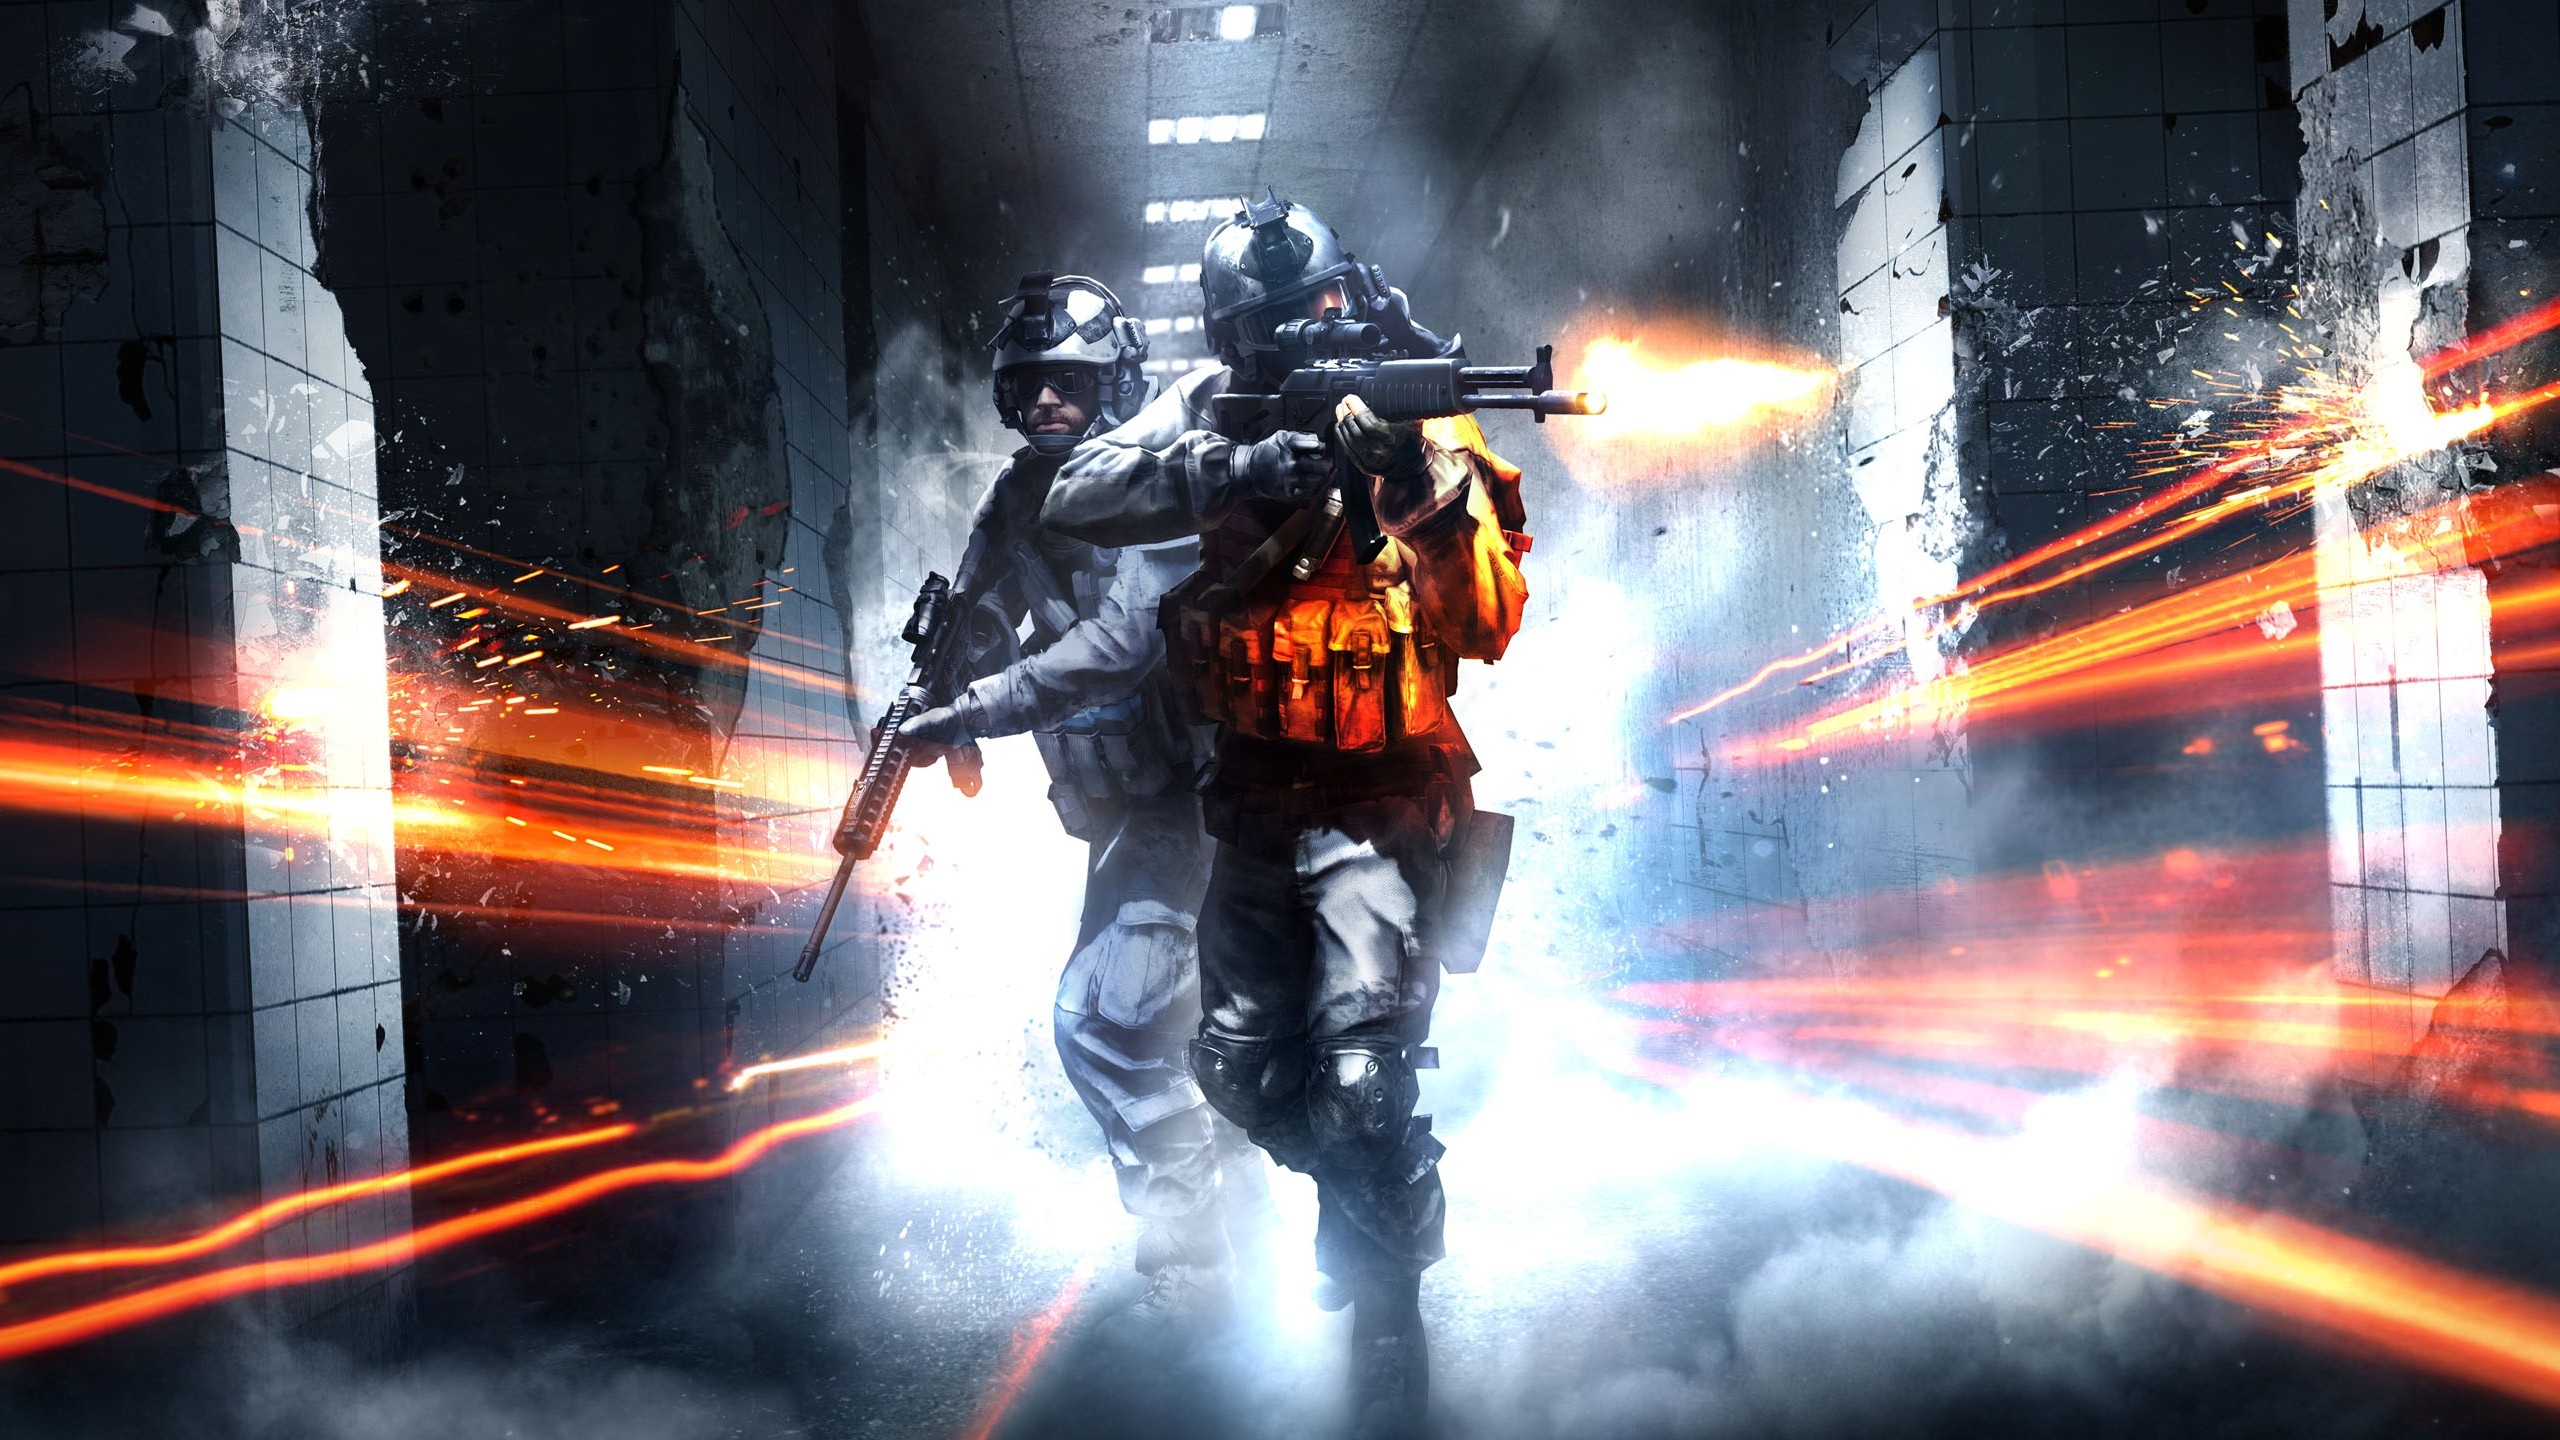 General 2560x1440 Battlefield 3 video games video game art PC gaming soldier video game men weapon